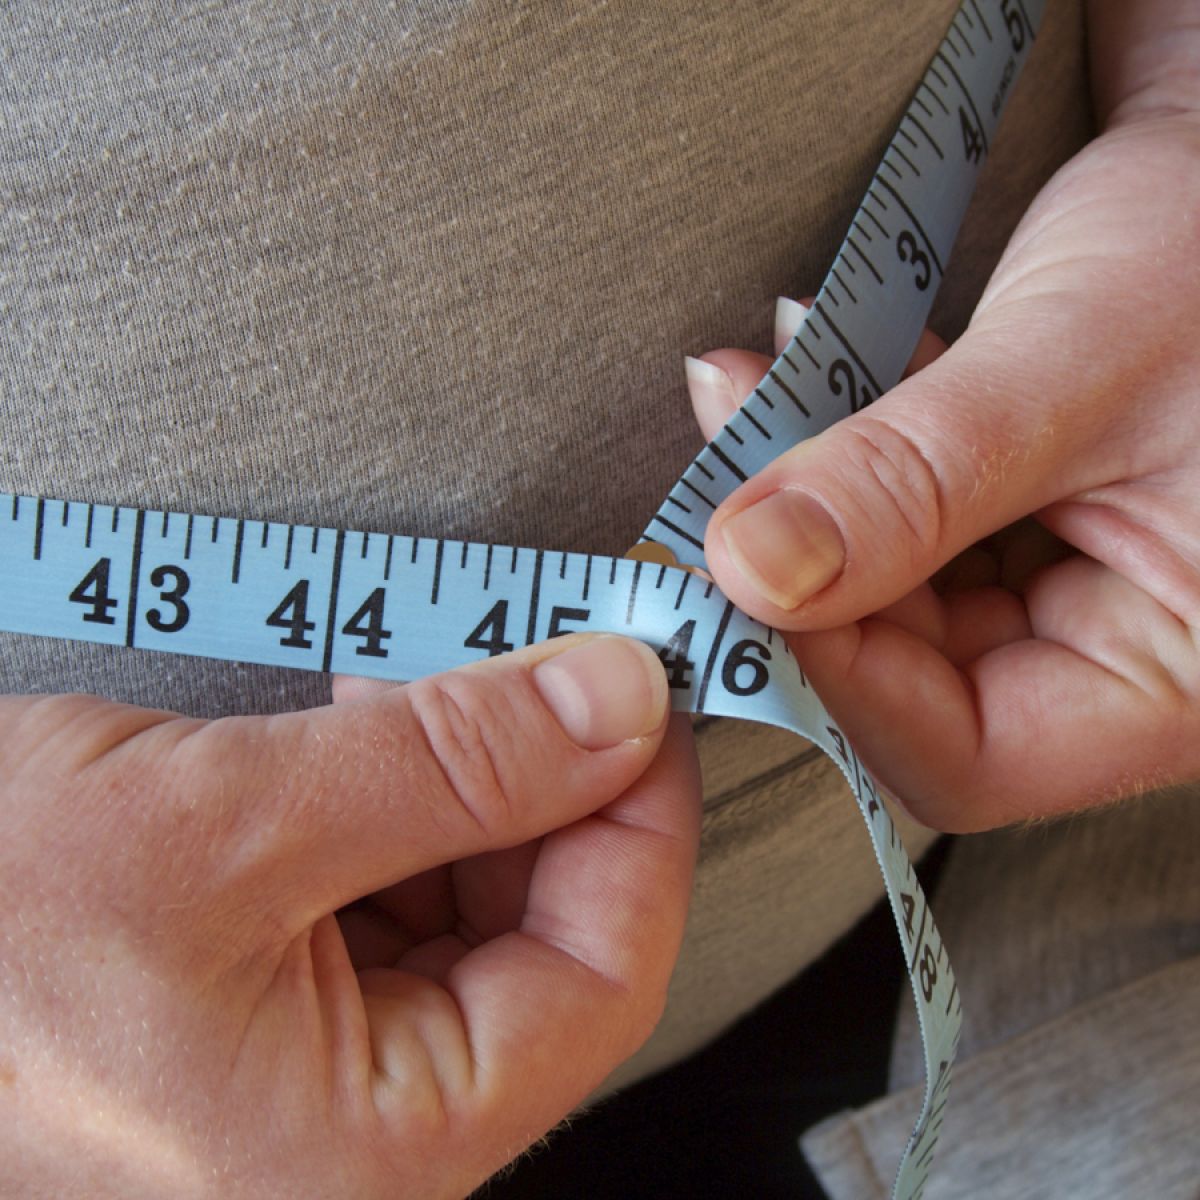 Average American waistline increased by more than an inch over the